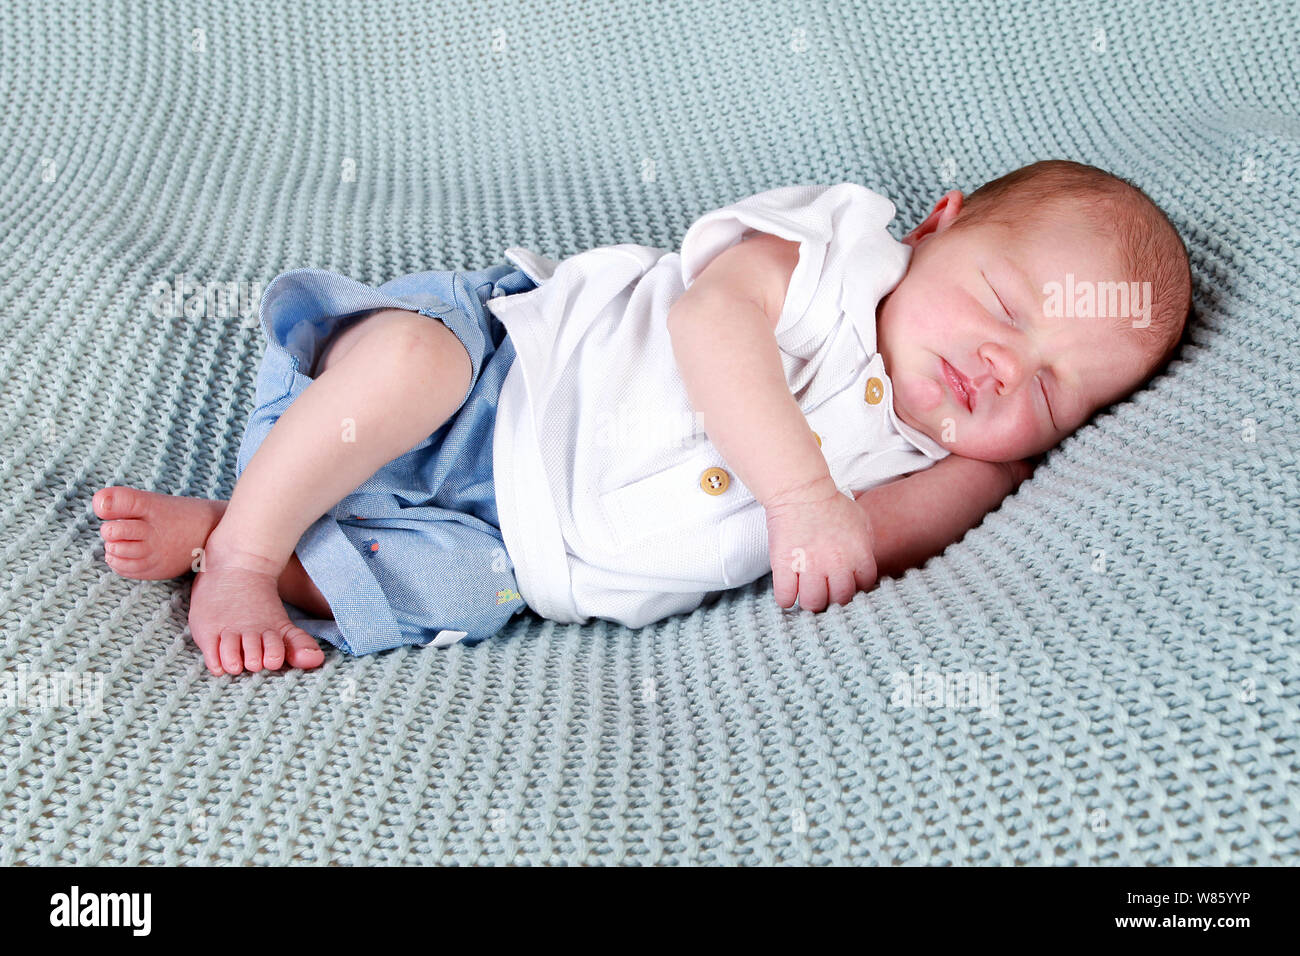 1 semaine baby boy sleeping Banque D'Images